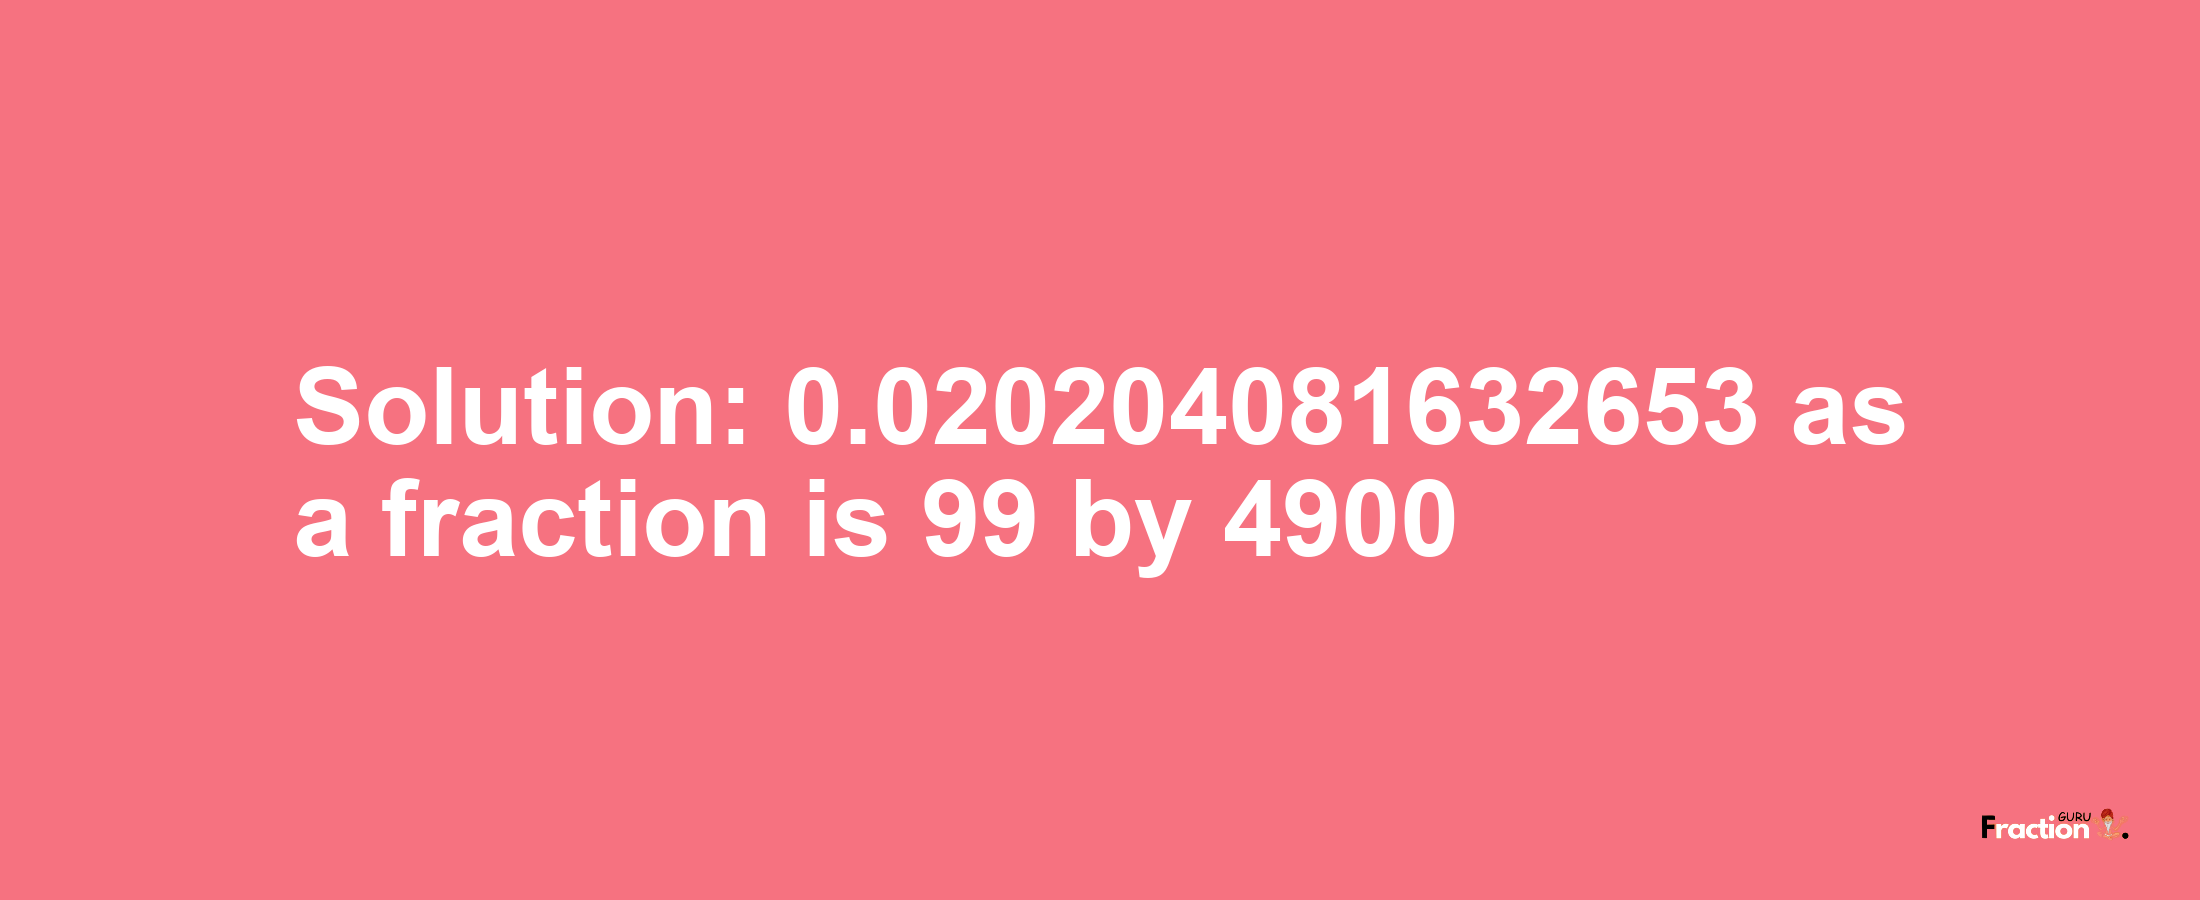 Solution:0.020204081632653 as a fraction is 99/4900